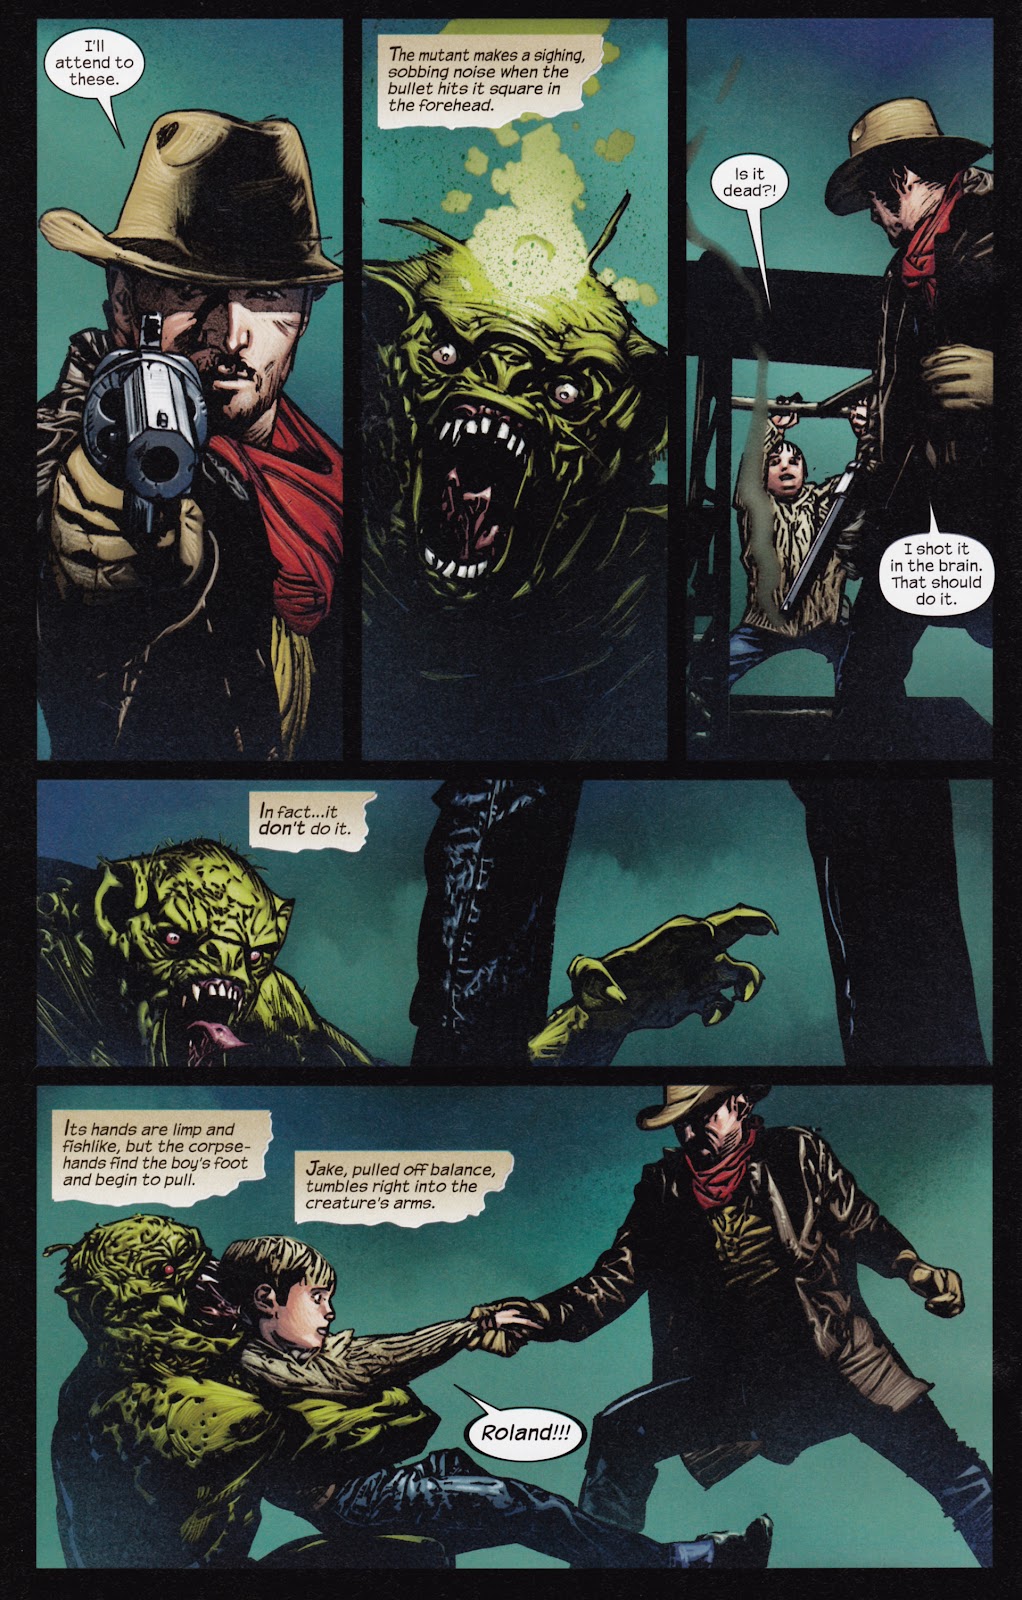 Dark Tower: The Gunslinger - The Man in Black issue 3 - Page 5